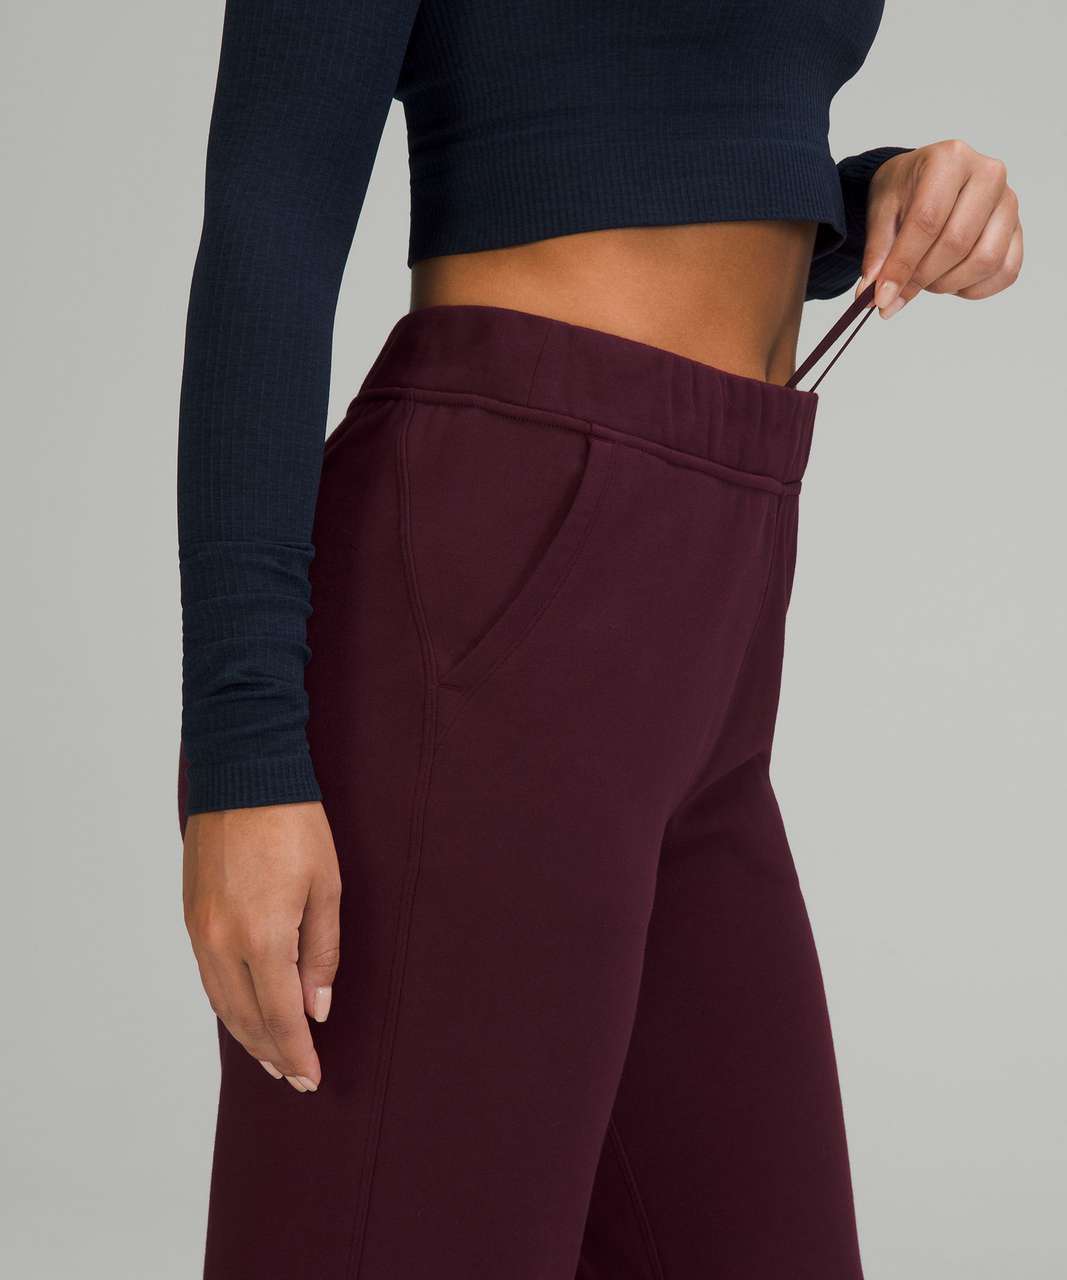 Lululemon Stretch High-rise Pants 7/8 Length In Cassis